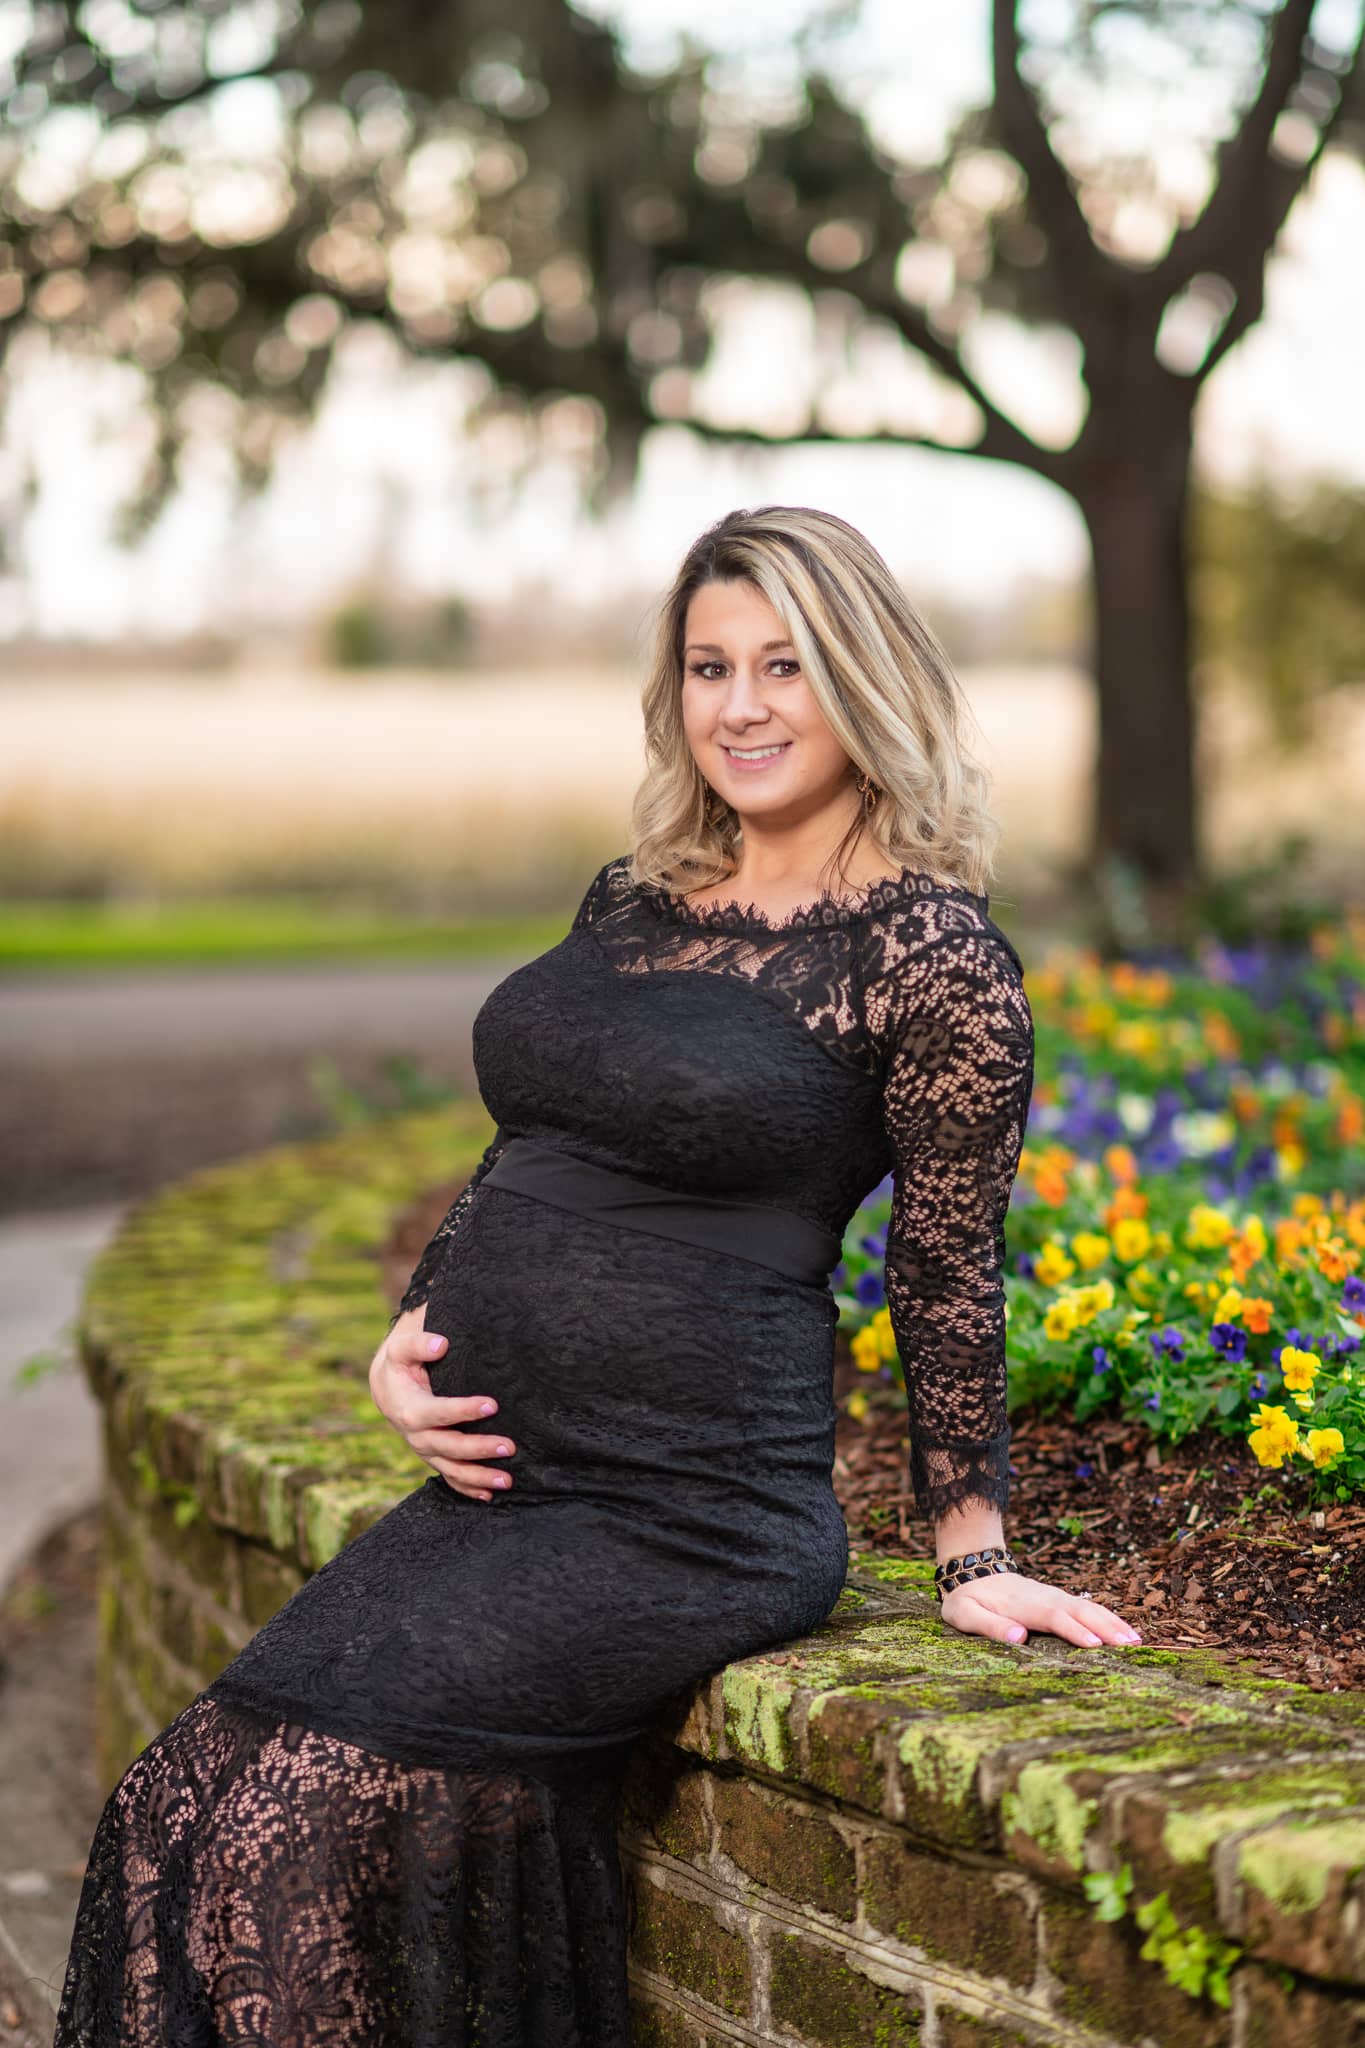 Maternity portrait sitting by the flowers - Caledonia Golf & Fish Club